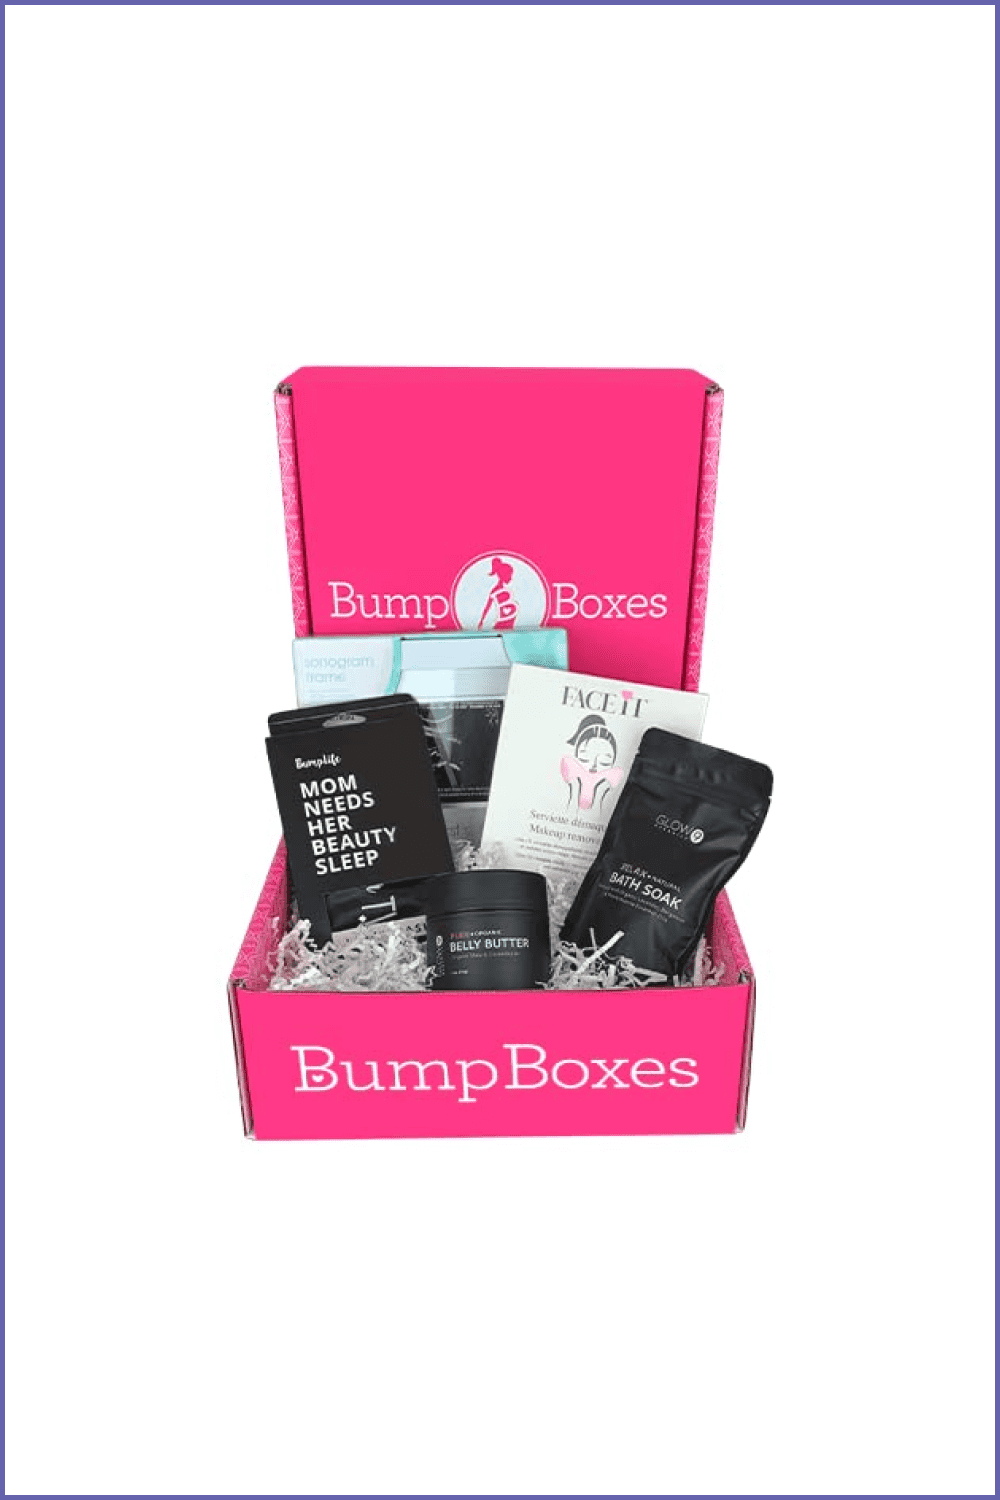 Pink box with black packaging of cosmetics.